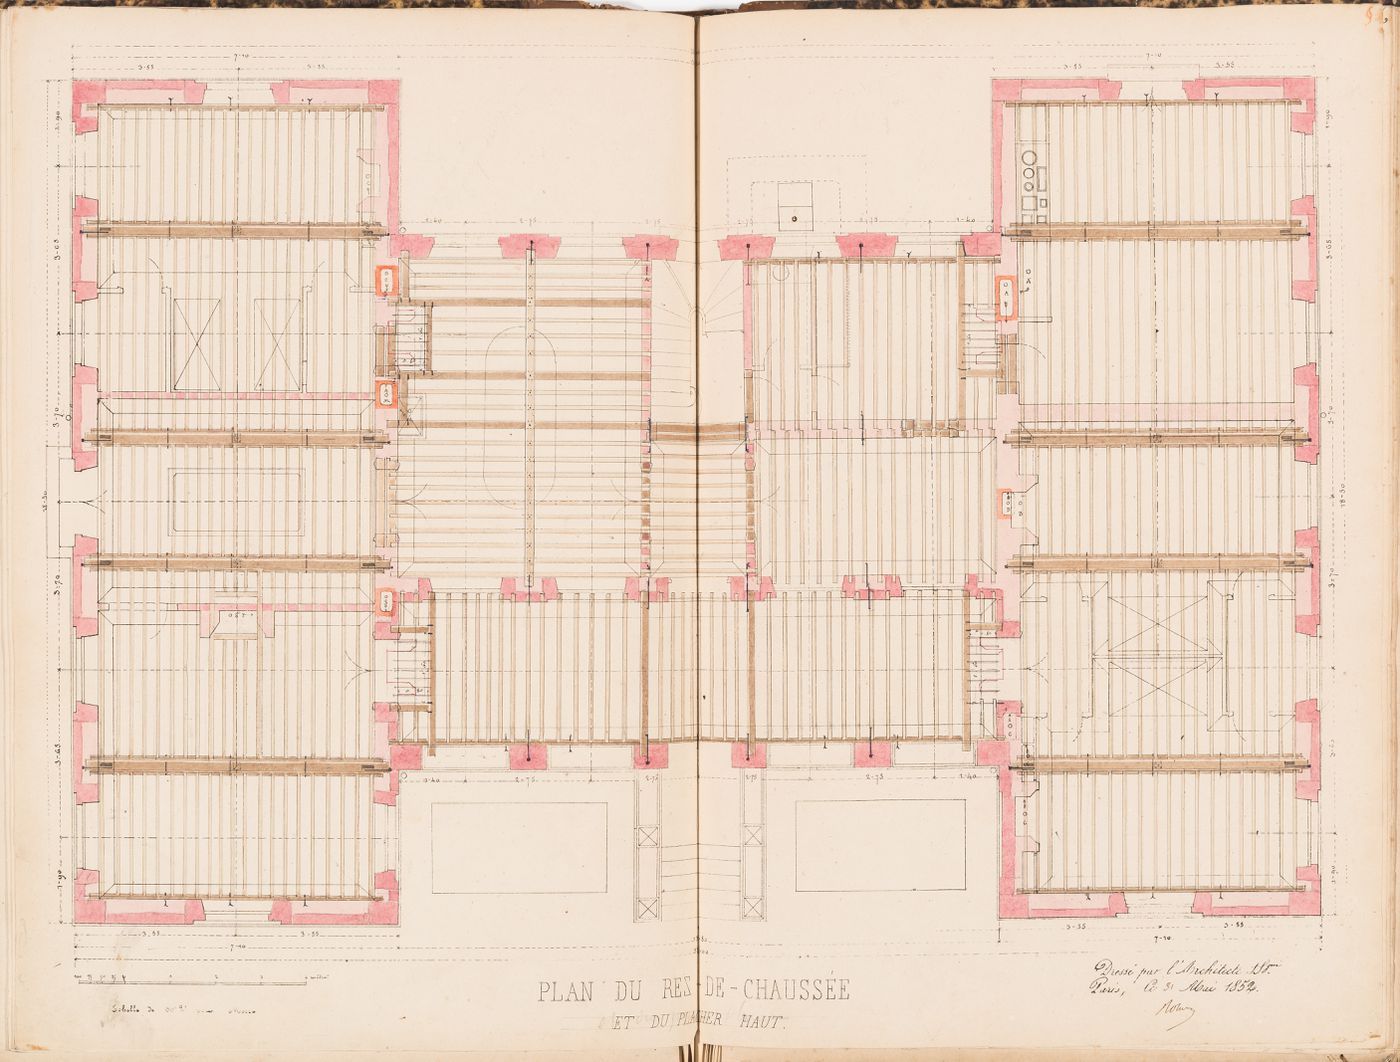 Ground floor plan, including floor framing, for a country house for Madame de Lescure, Royan